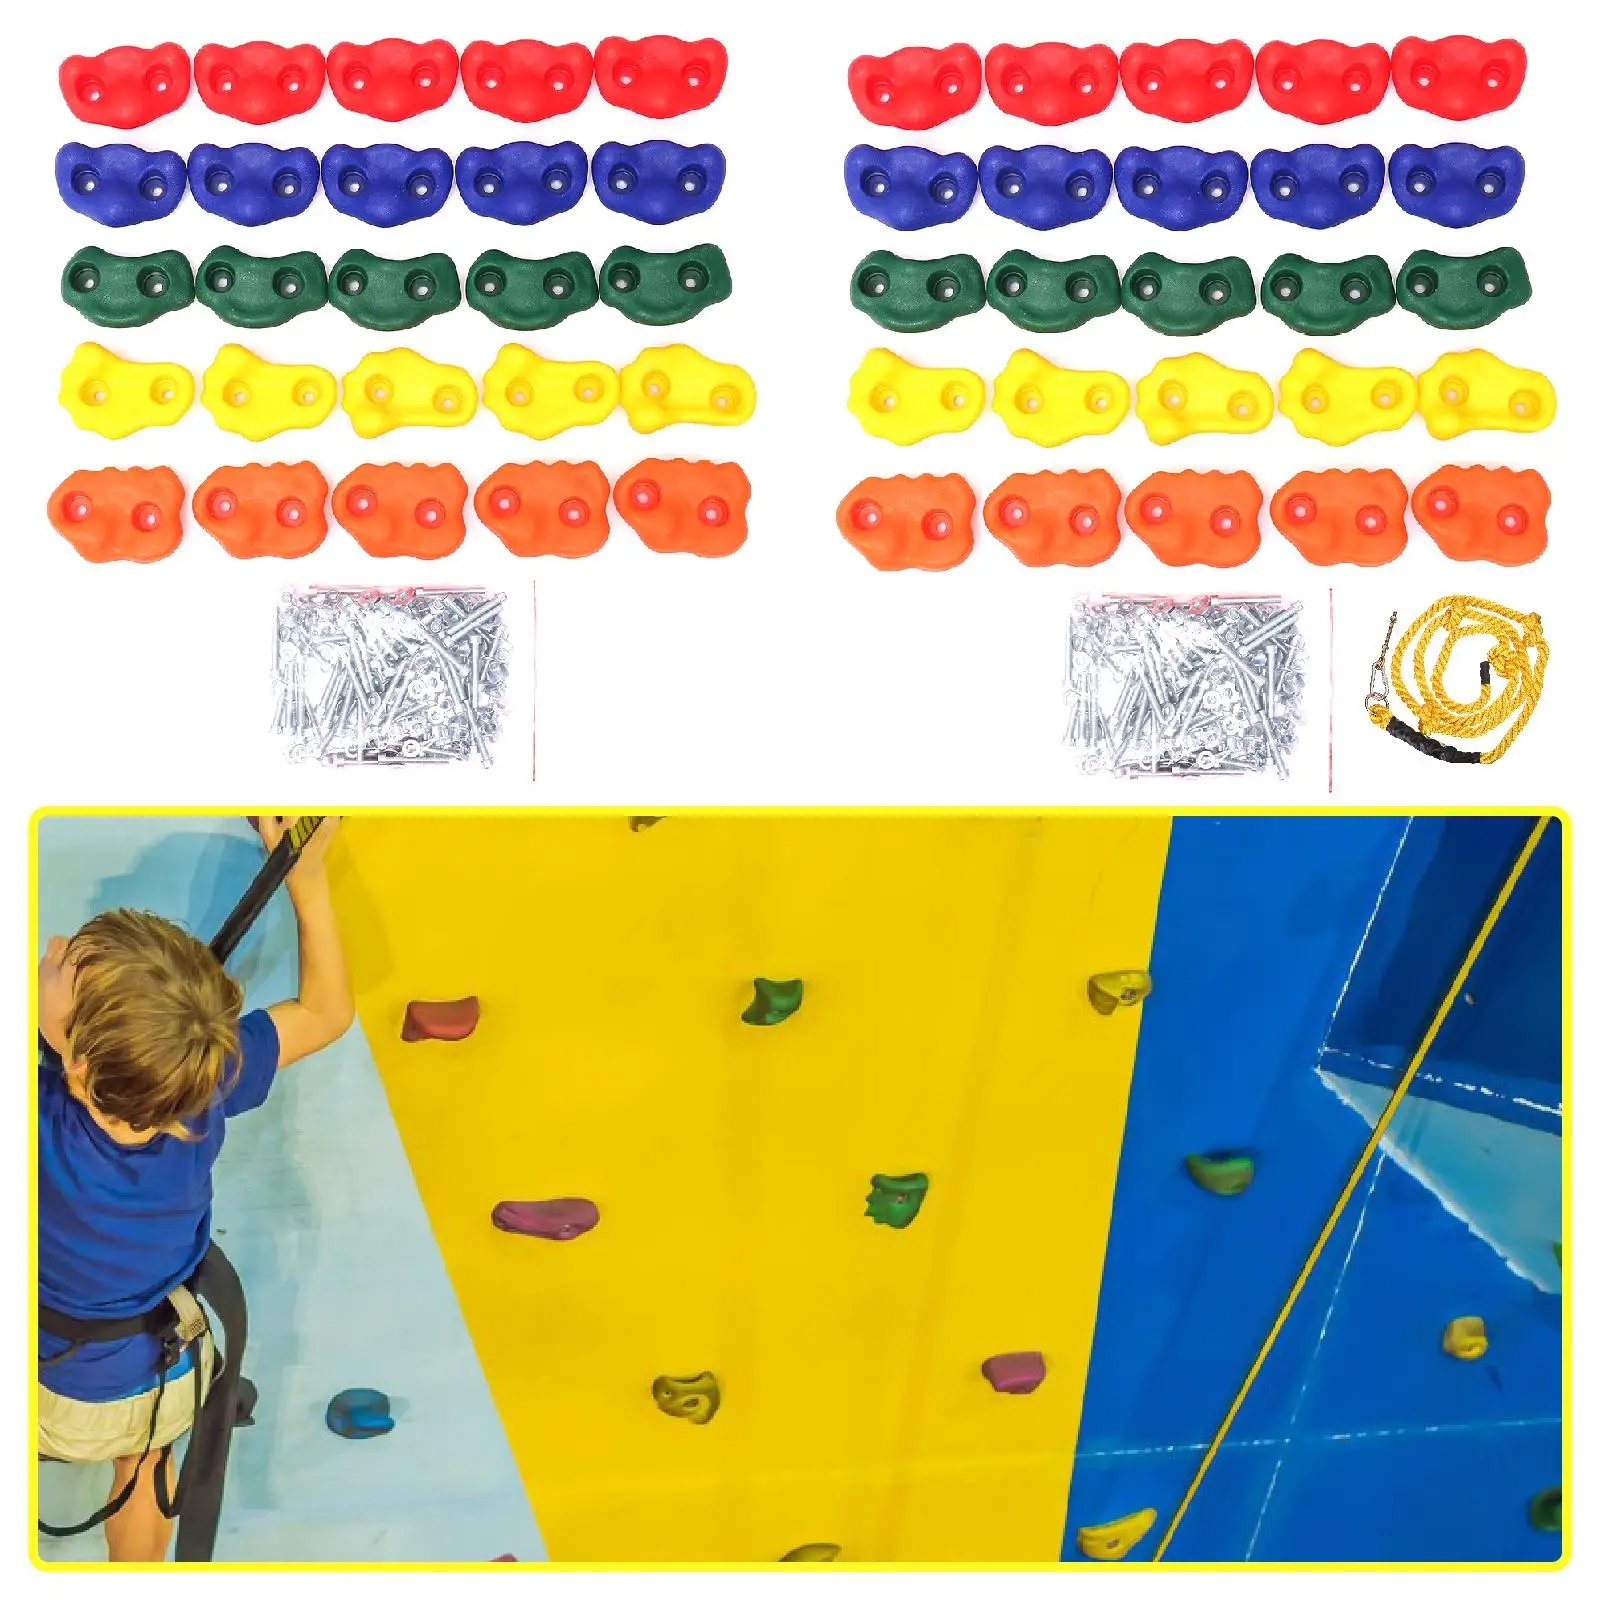 25 Pieces Rock Climbing Holds for Kids Kids Toys Children with Screw Backyard Outdoor Games Comfortable Tree Climbing Holds